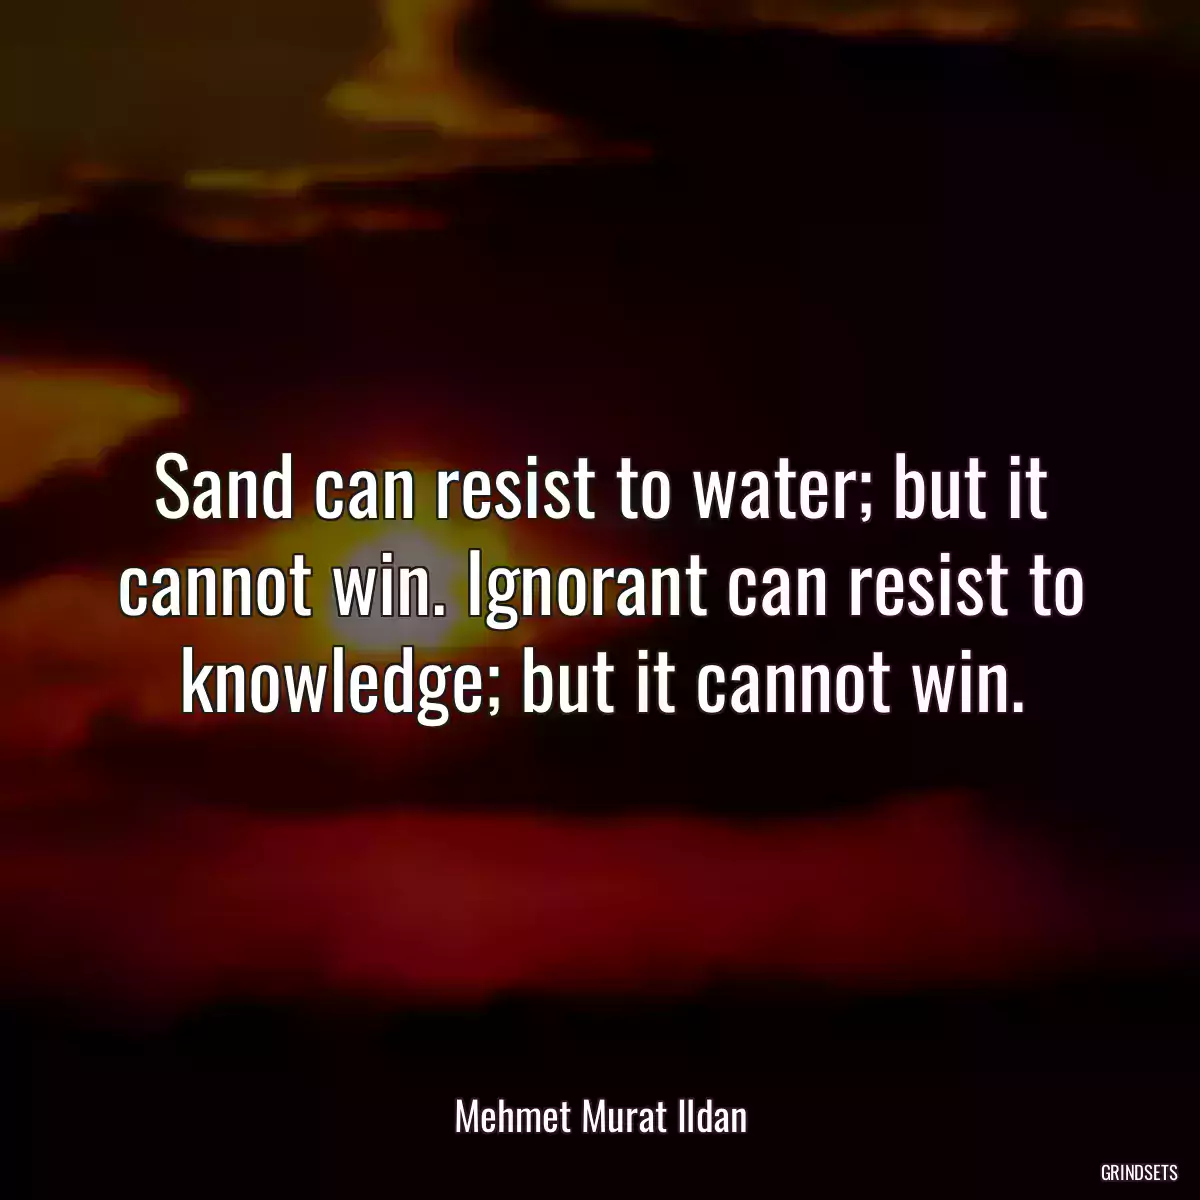 Sand can resist to water; but it cannot win. Ignorant can resist to knowledge; but it cannot win.